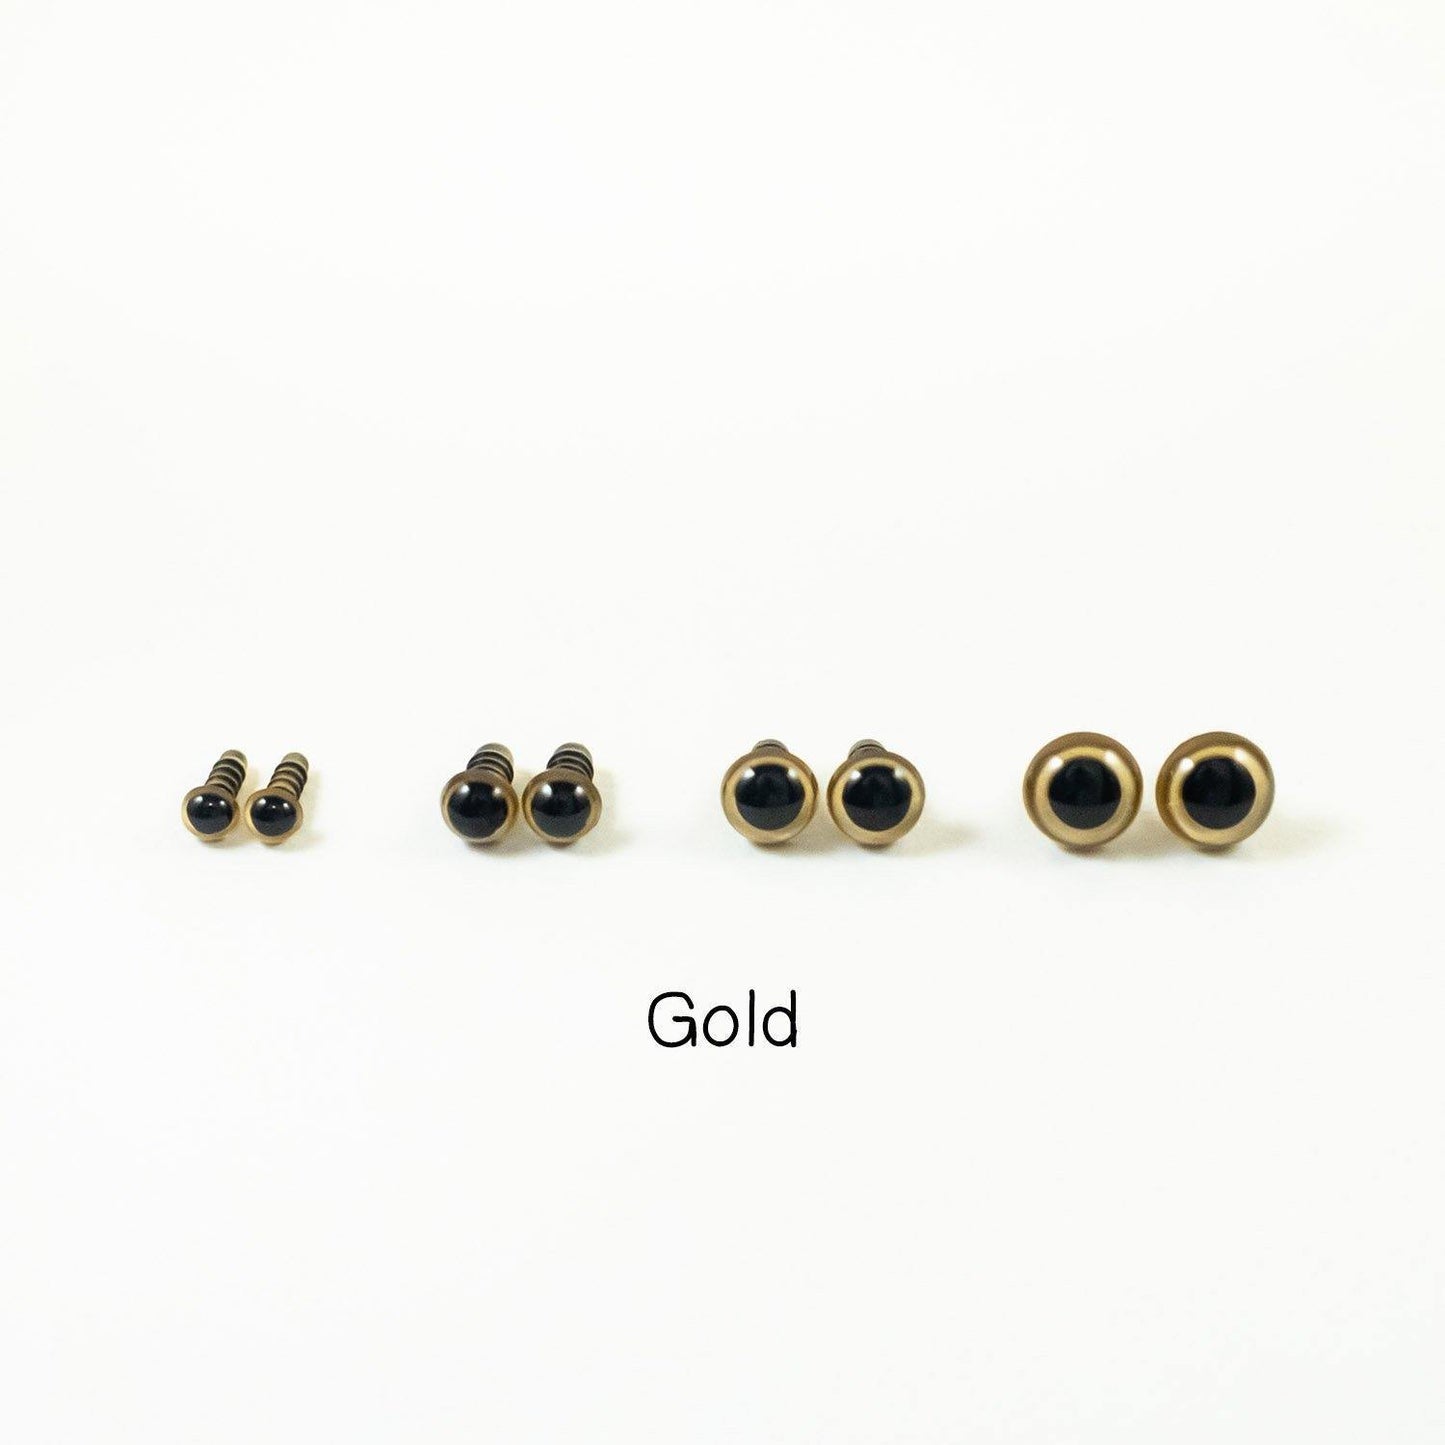 Gold colour safety eyes in 6mm, 8mm, 10mm, 12mm